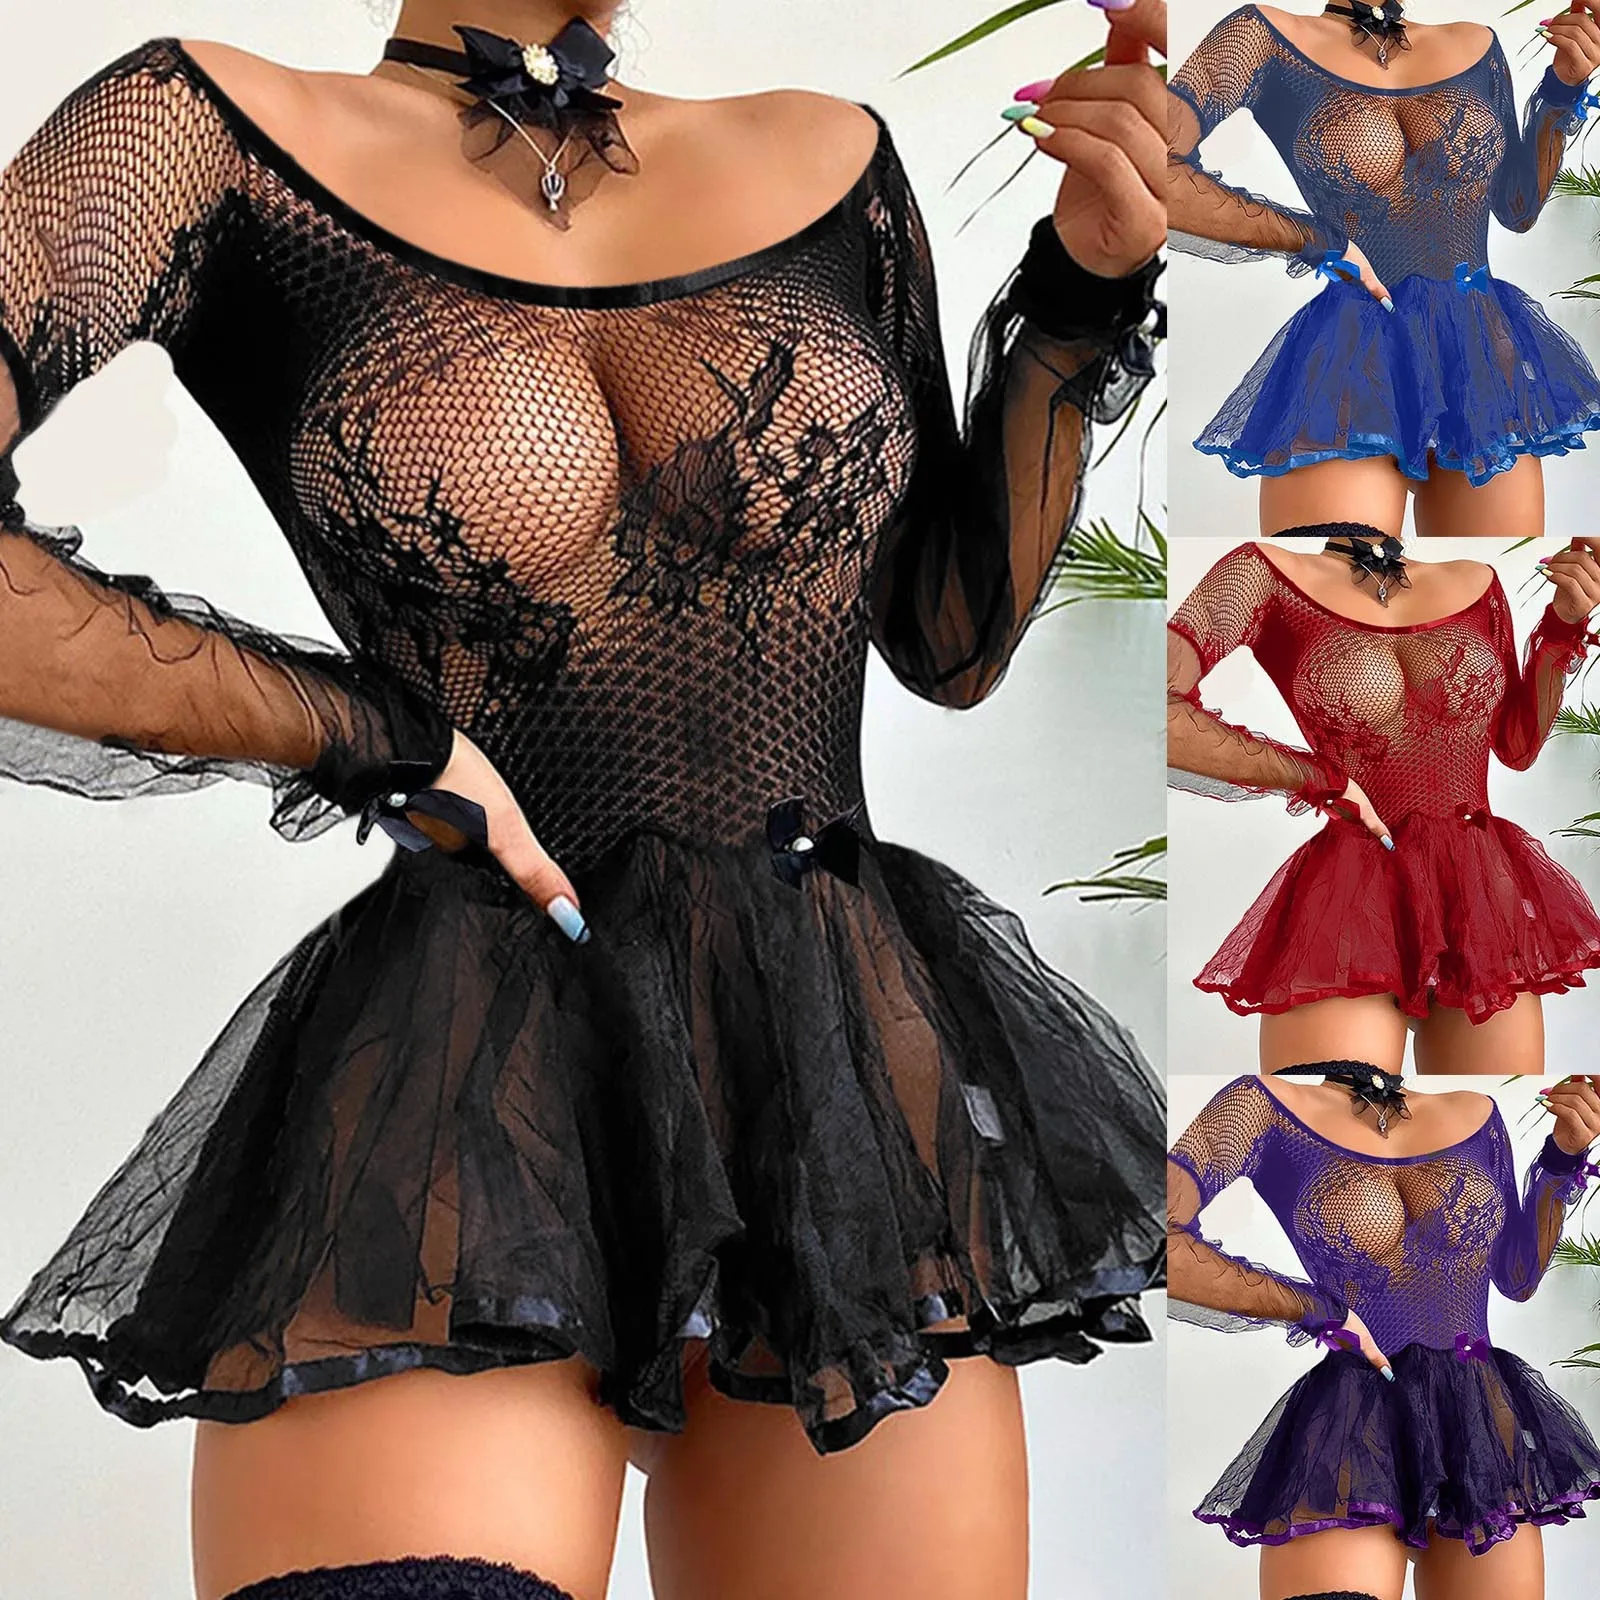 

Sexy Lingerie Women Mesh Babydoll Underwear Exotic Dresses Hot Cosplay Fun Elastic Teddy Costumes Nightgown Intimate Slips Porno